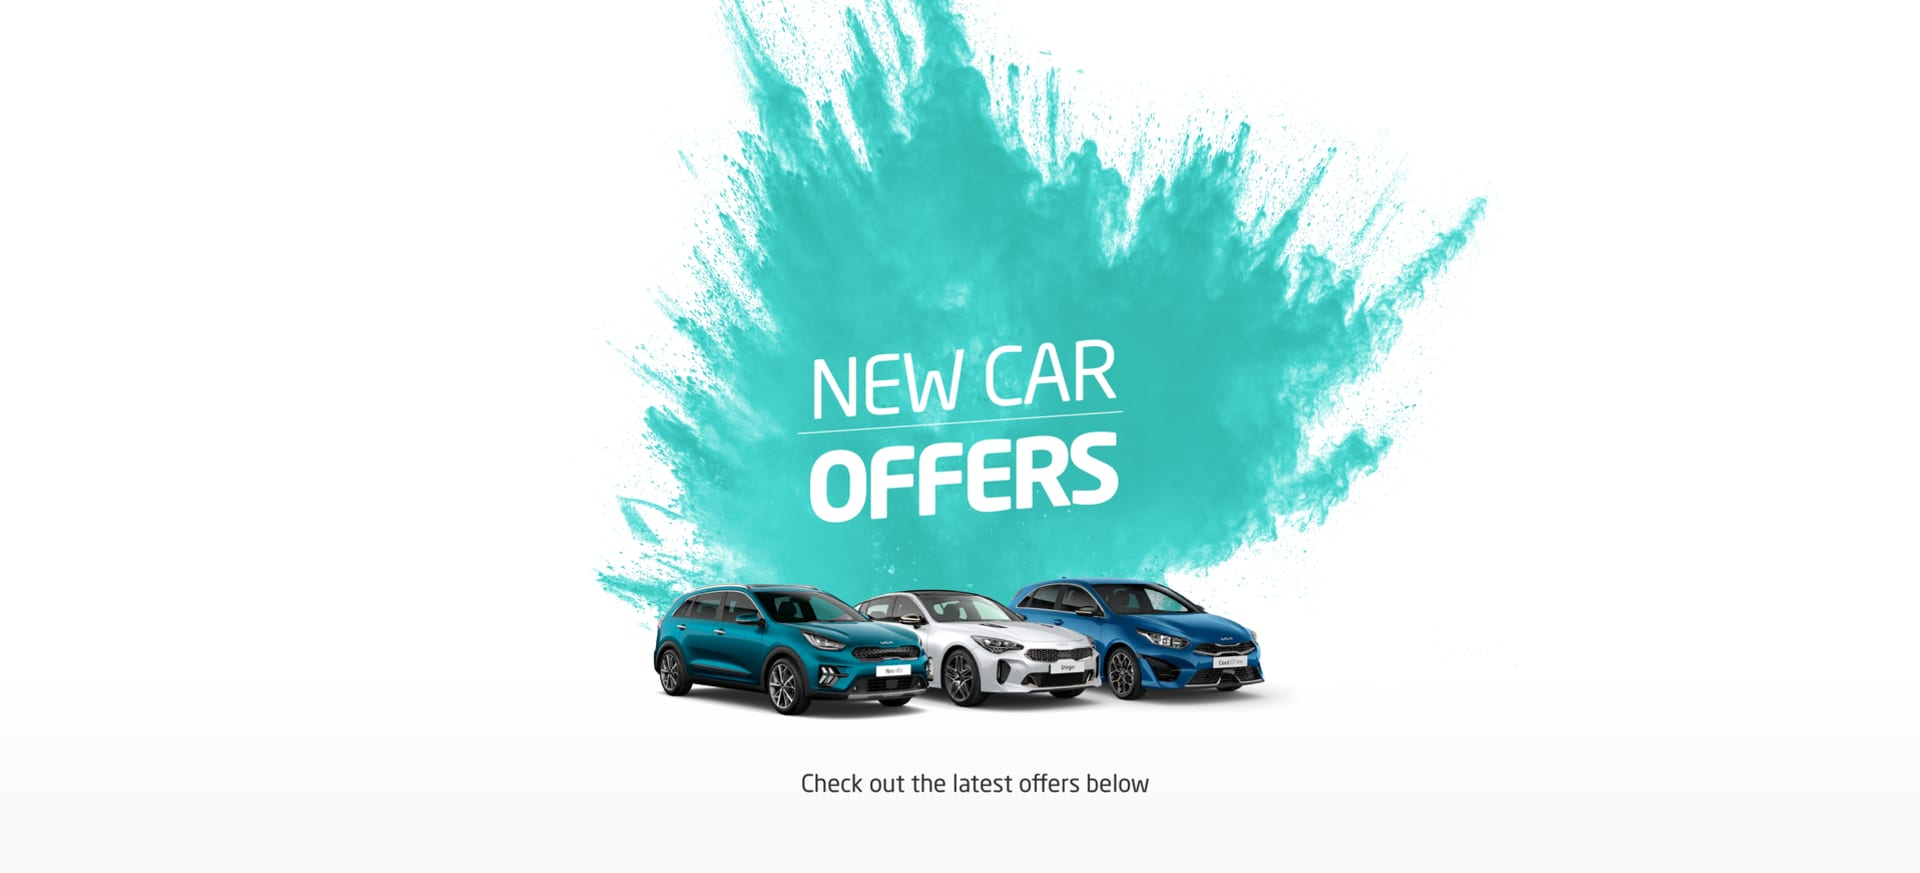 New Car Offers